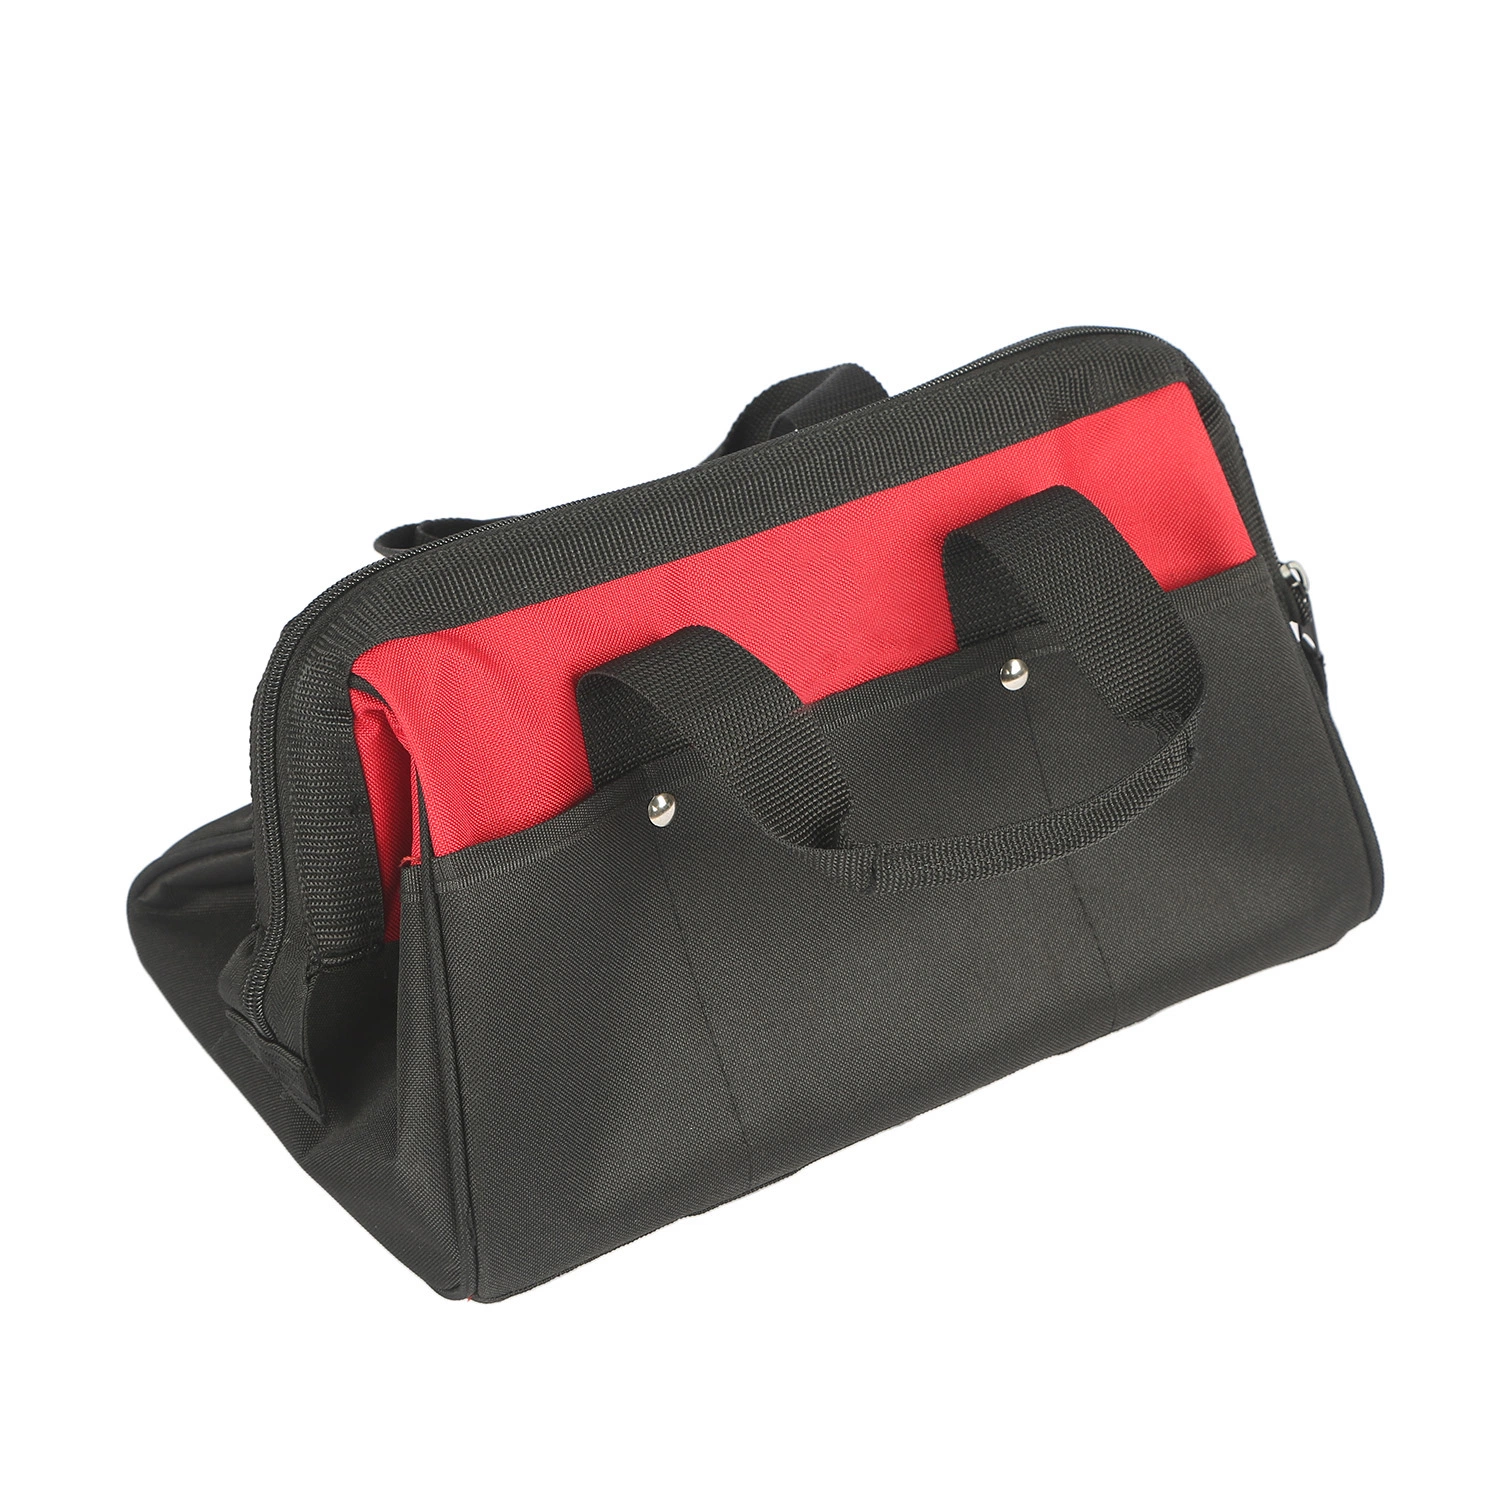 Repaired Tool Bag in One Set